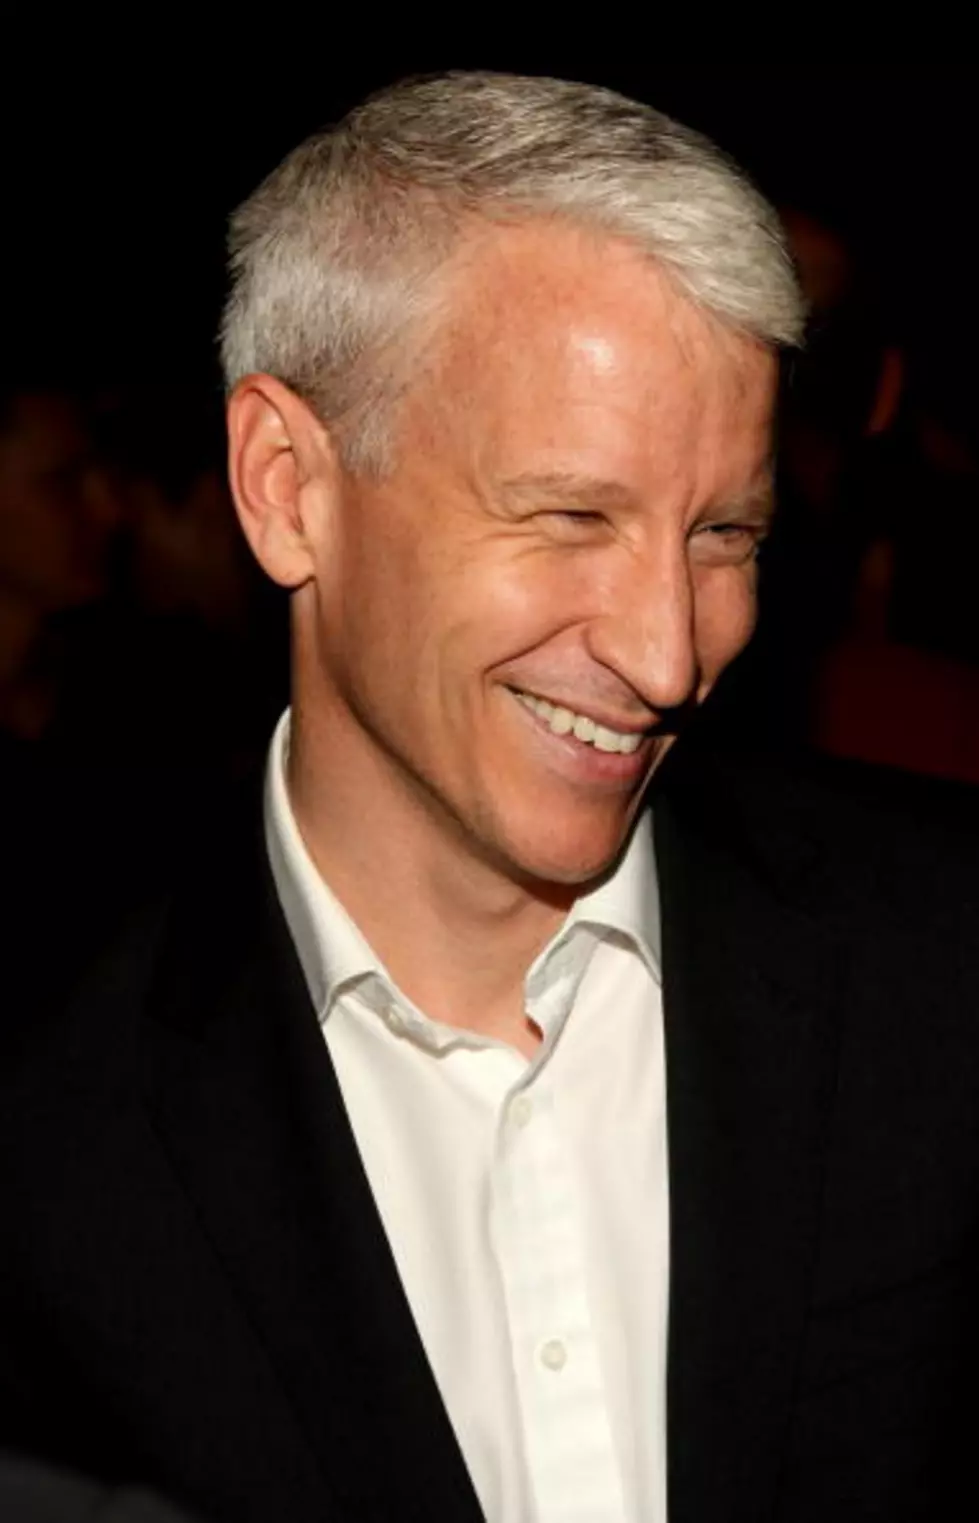 Anderson Cooper’s Giggling Fit Among The Top Five Viral Videos Of The Month